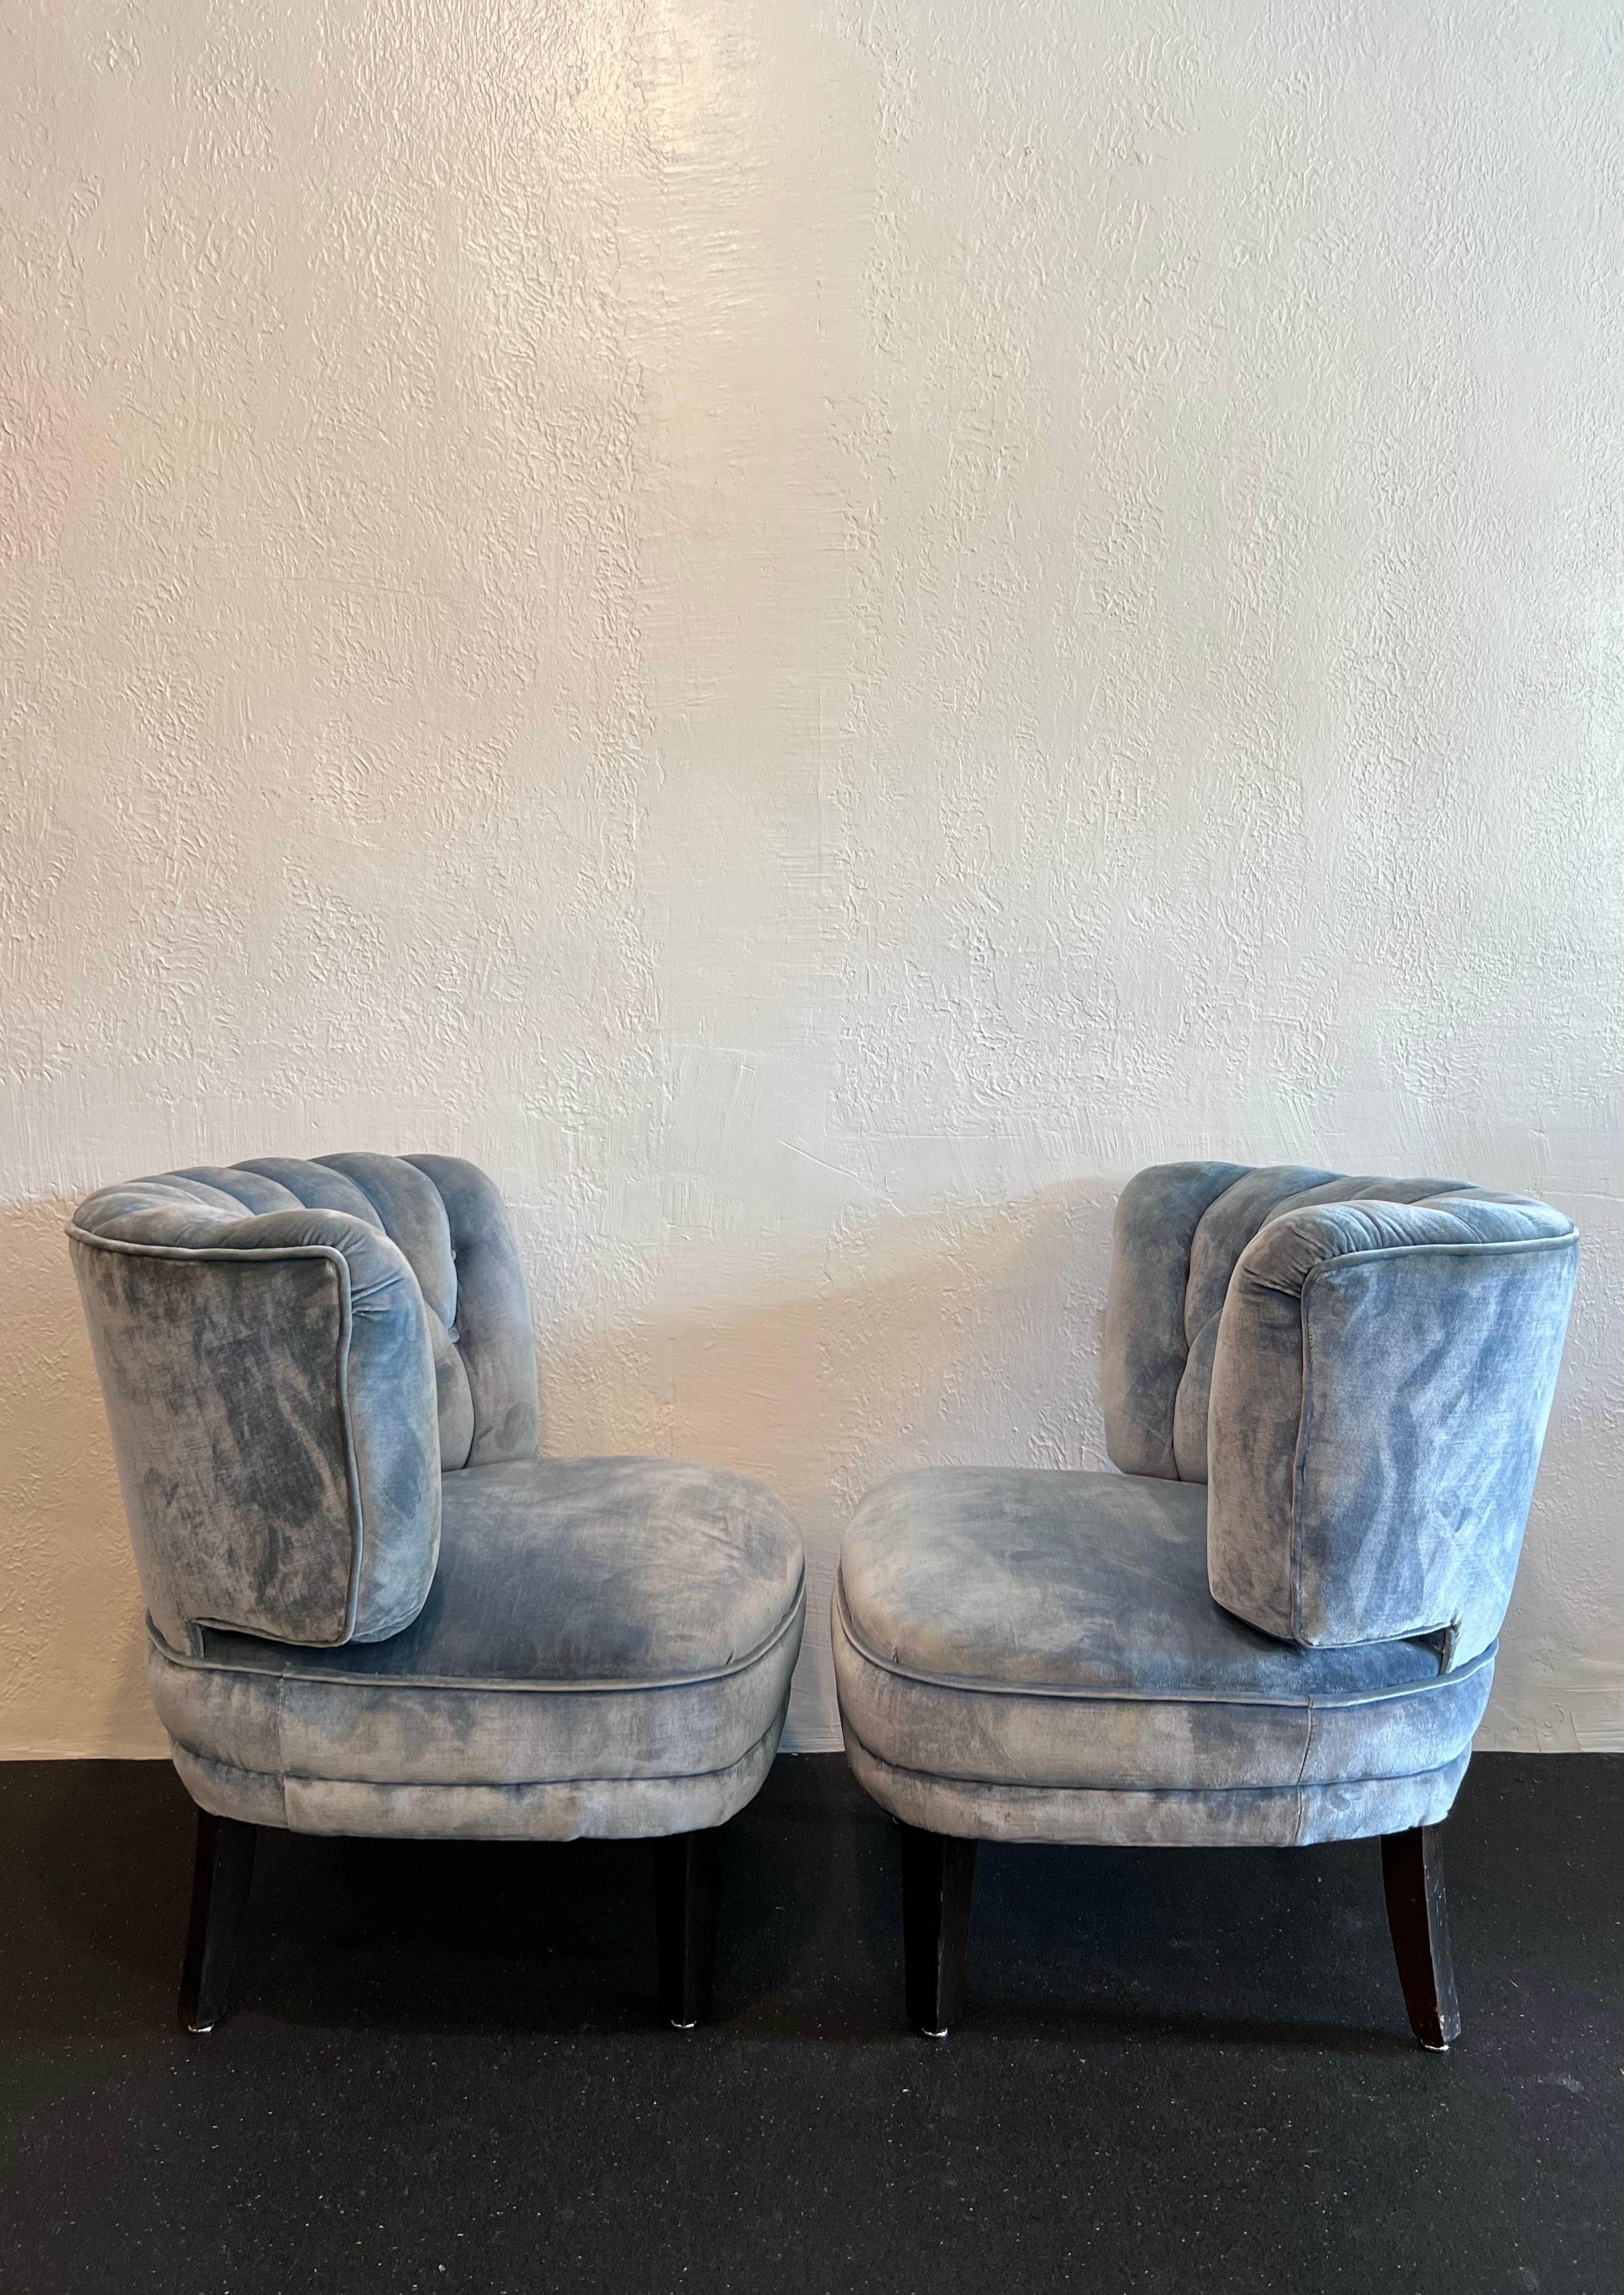 Pair of Otto Schulz tufted easy chairs. The velvet upholstery has been professionally cleaned and is found in good condition, no rips or tears. Legs show signs of wear (please refer to photos). 

Would work well in a variety of interiors such as